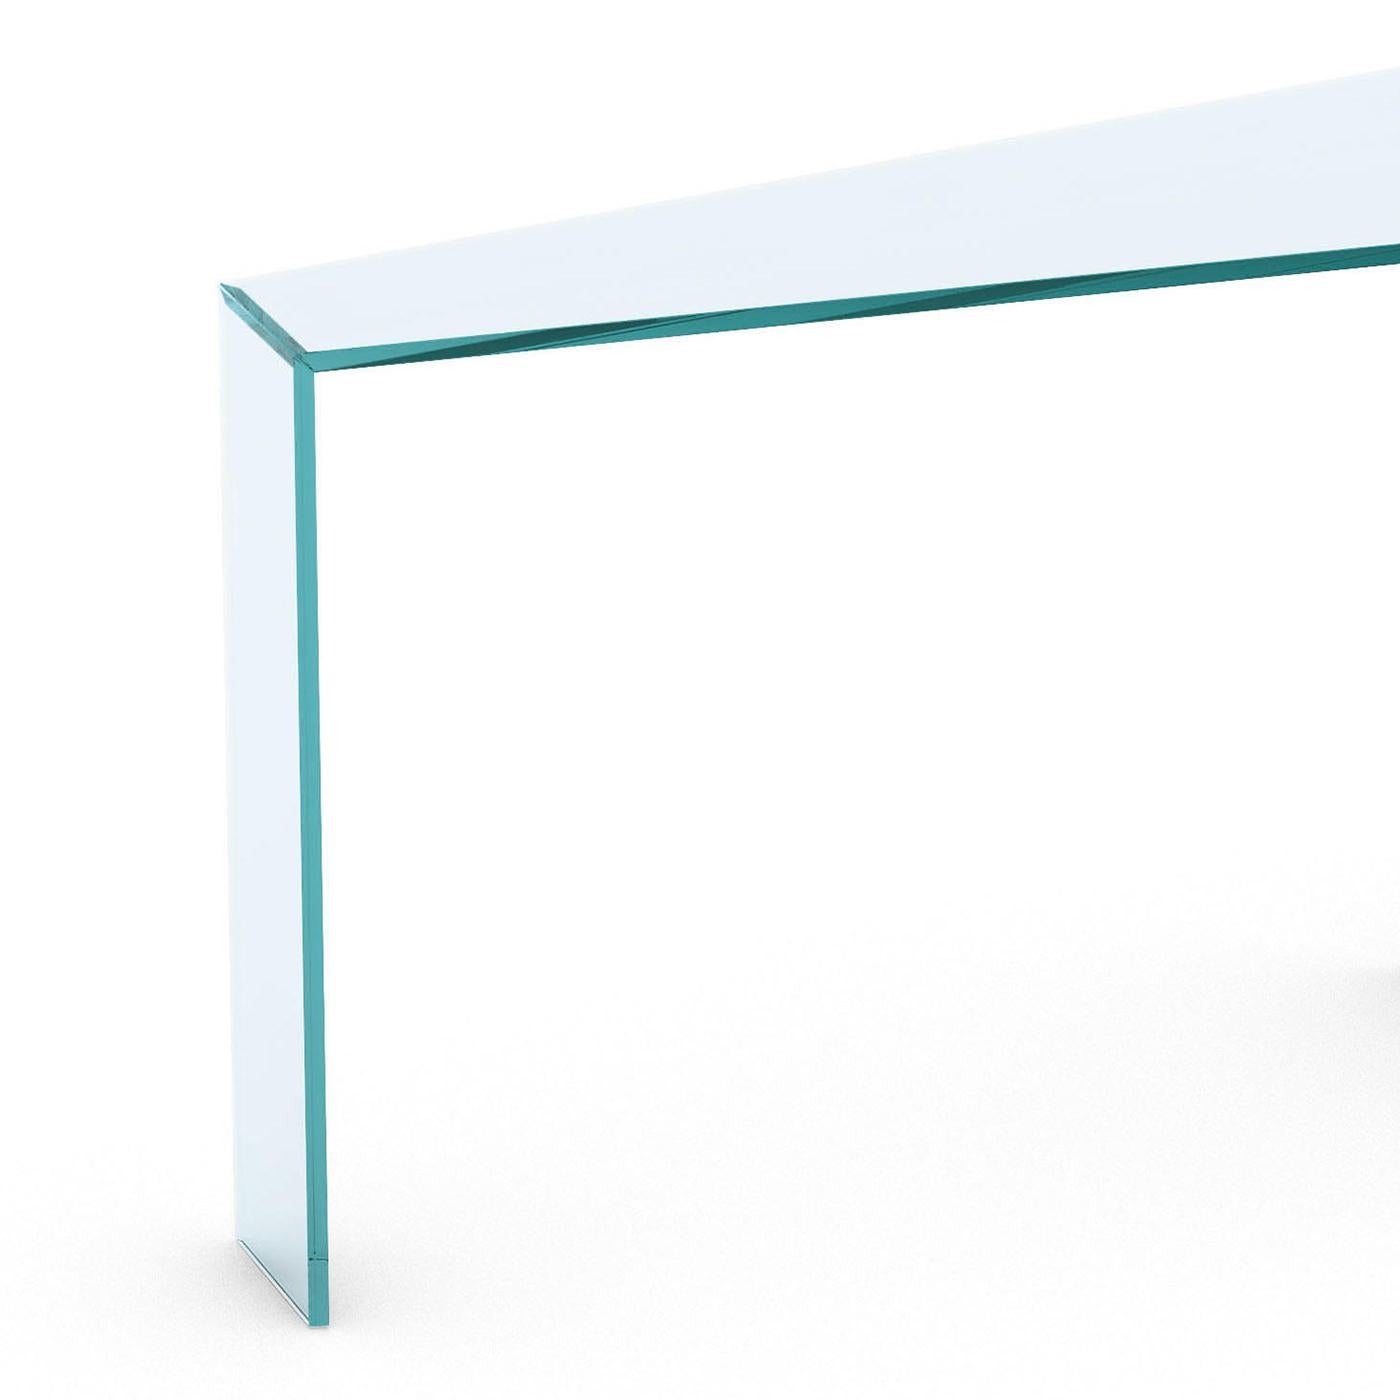 Console Table Axis all in clear glass with asymetrical 
shape. 15mm thickness glass with oblique welding on sides.
Also available in Axis Desk, on request.